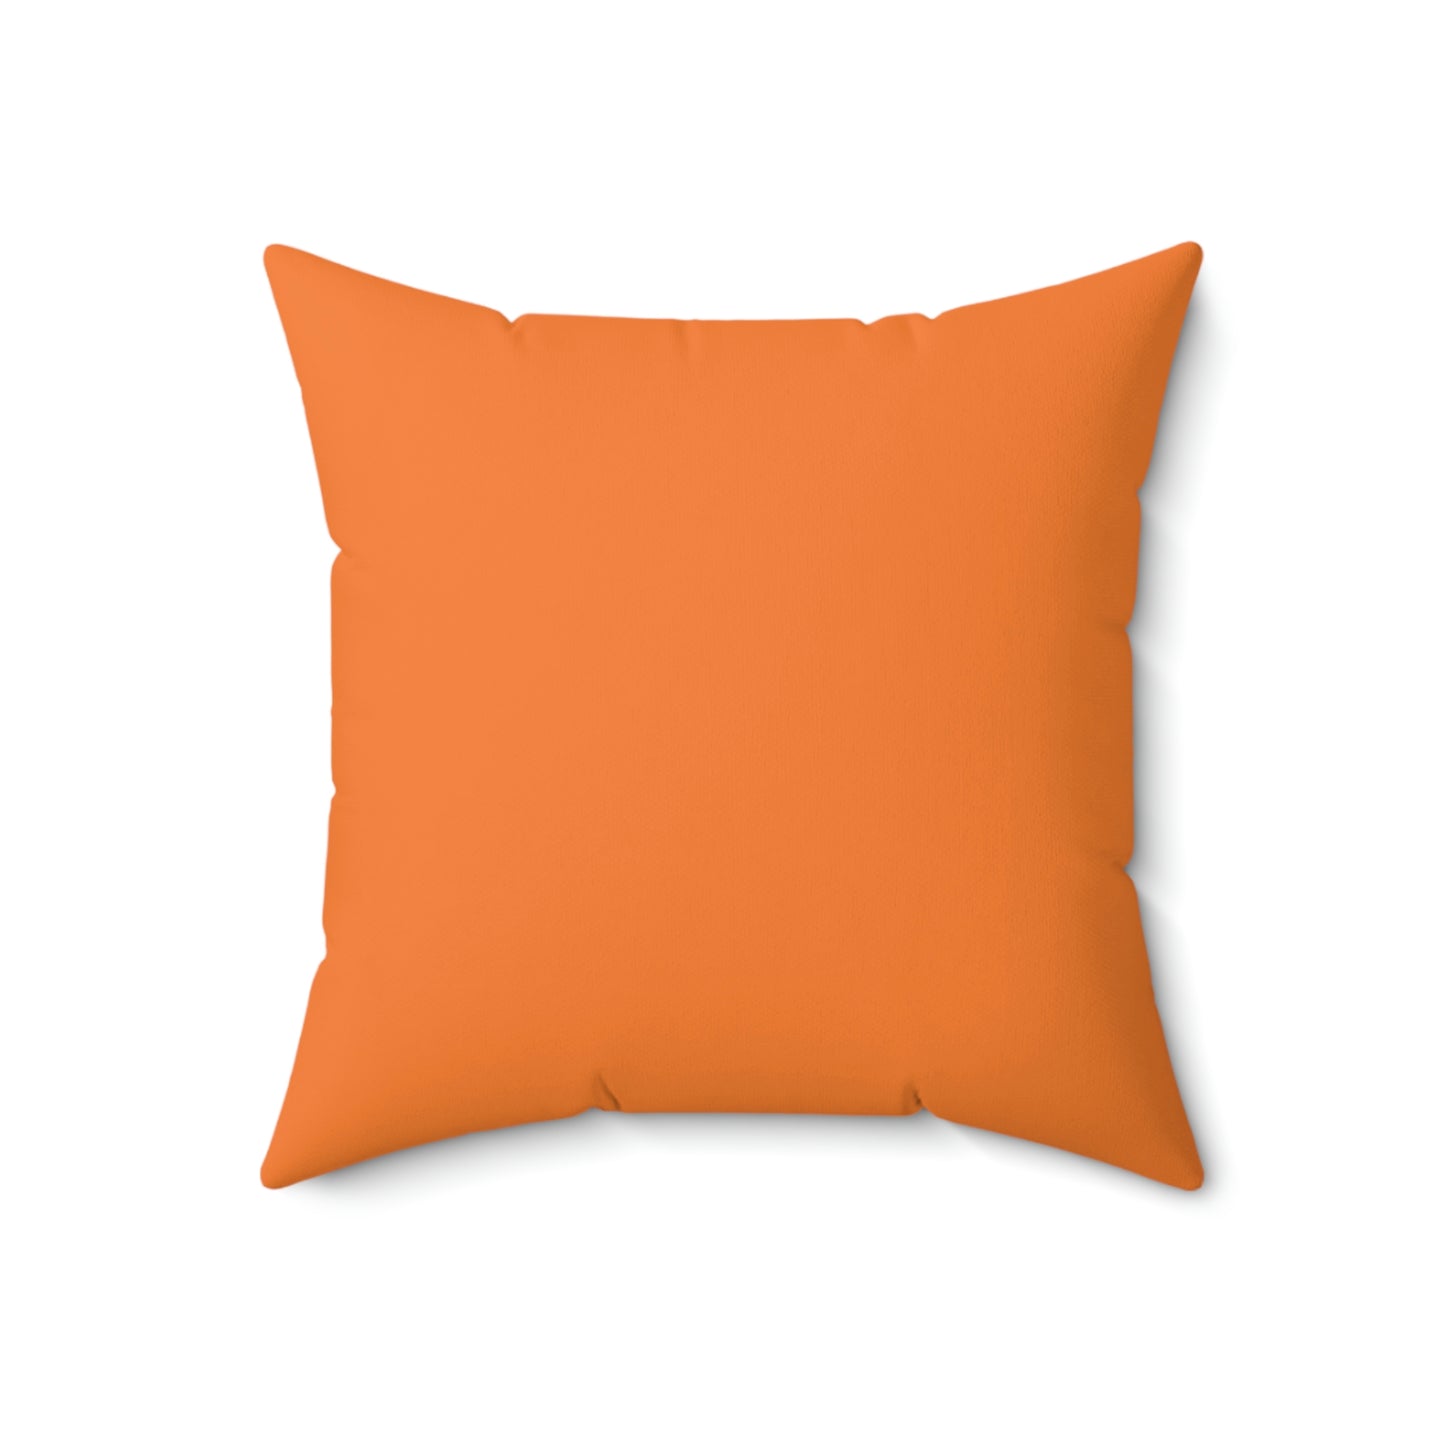 Spun Polyester Square Pillow Case "Best Dad Ever on Crusta”